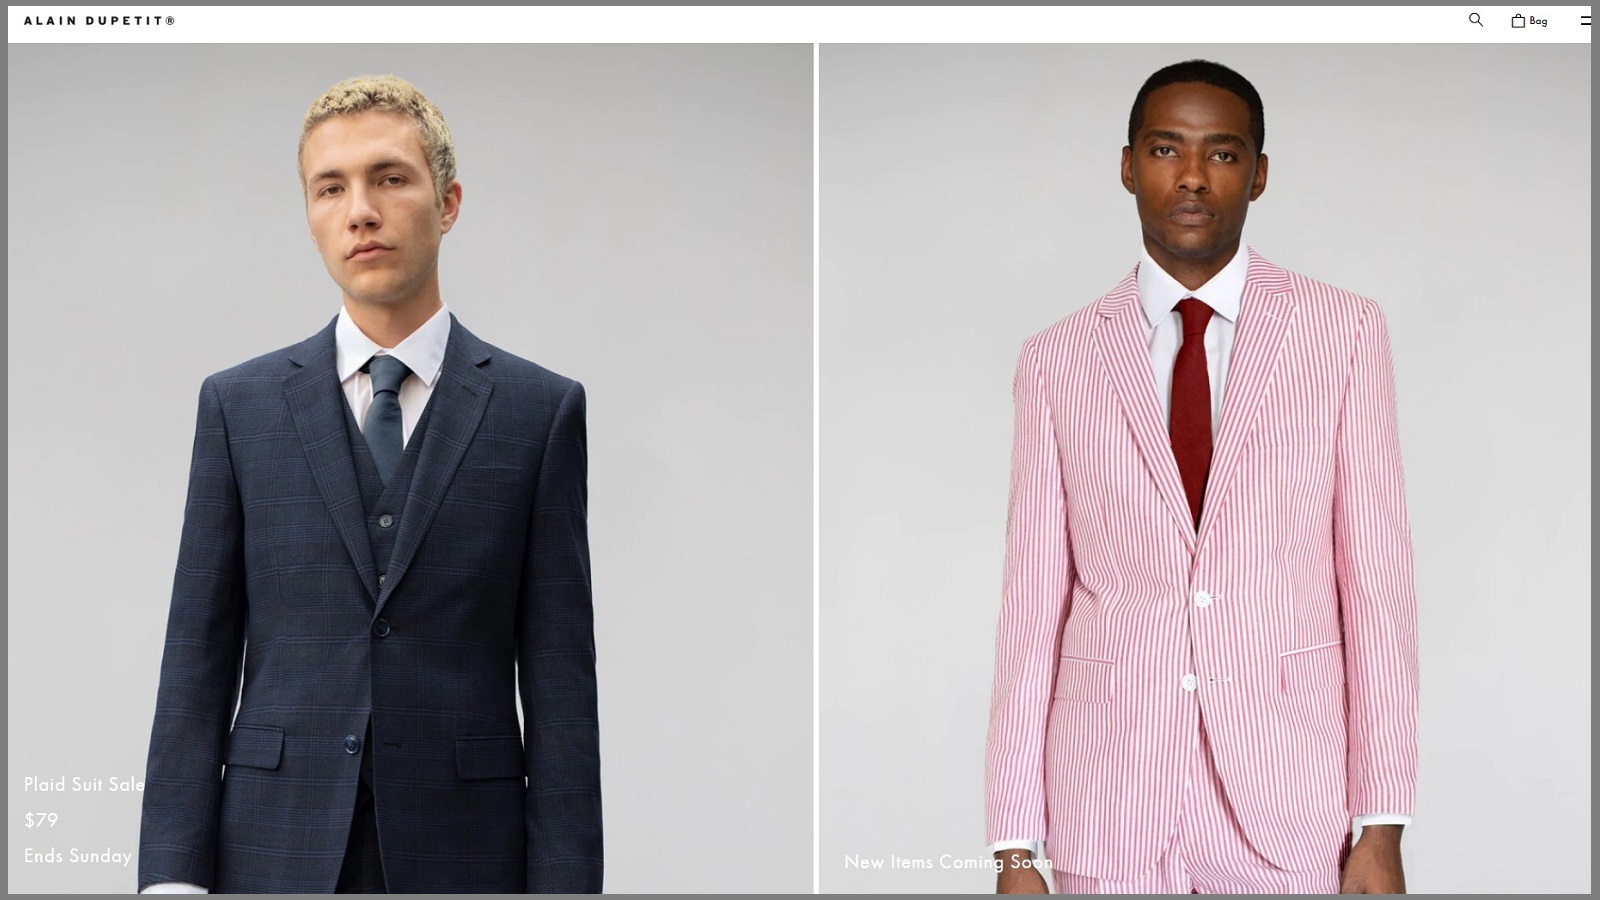 Alain Dupetit Review: Is Their Suits Worth to Buy?